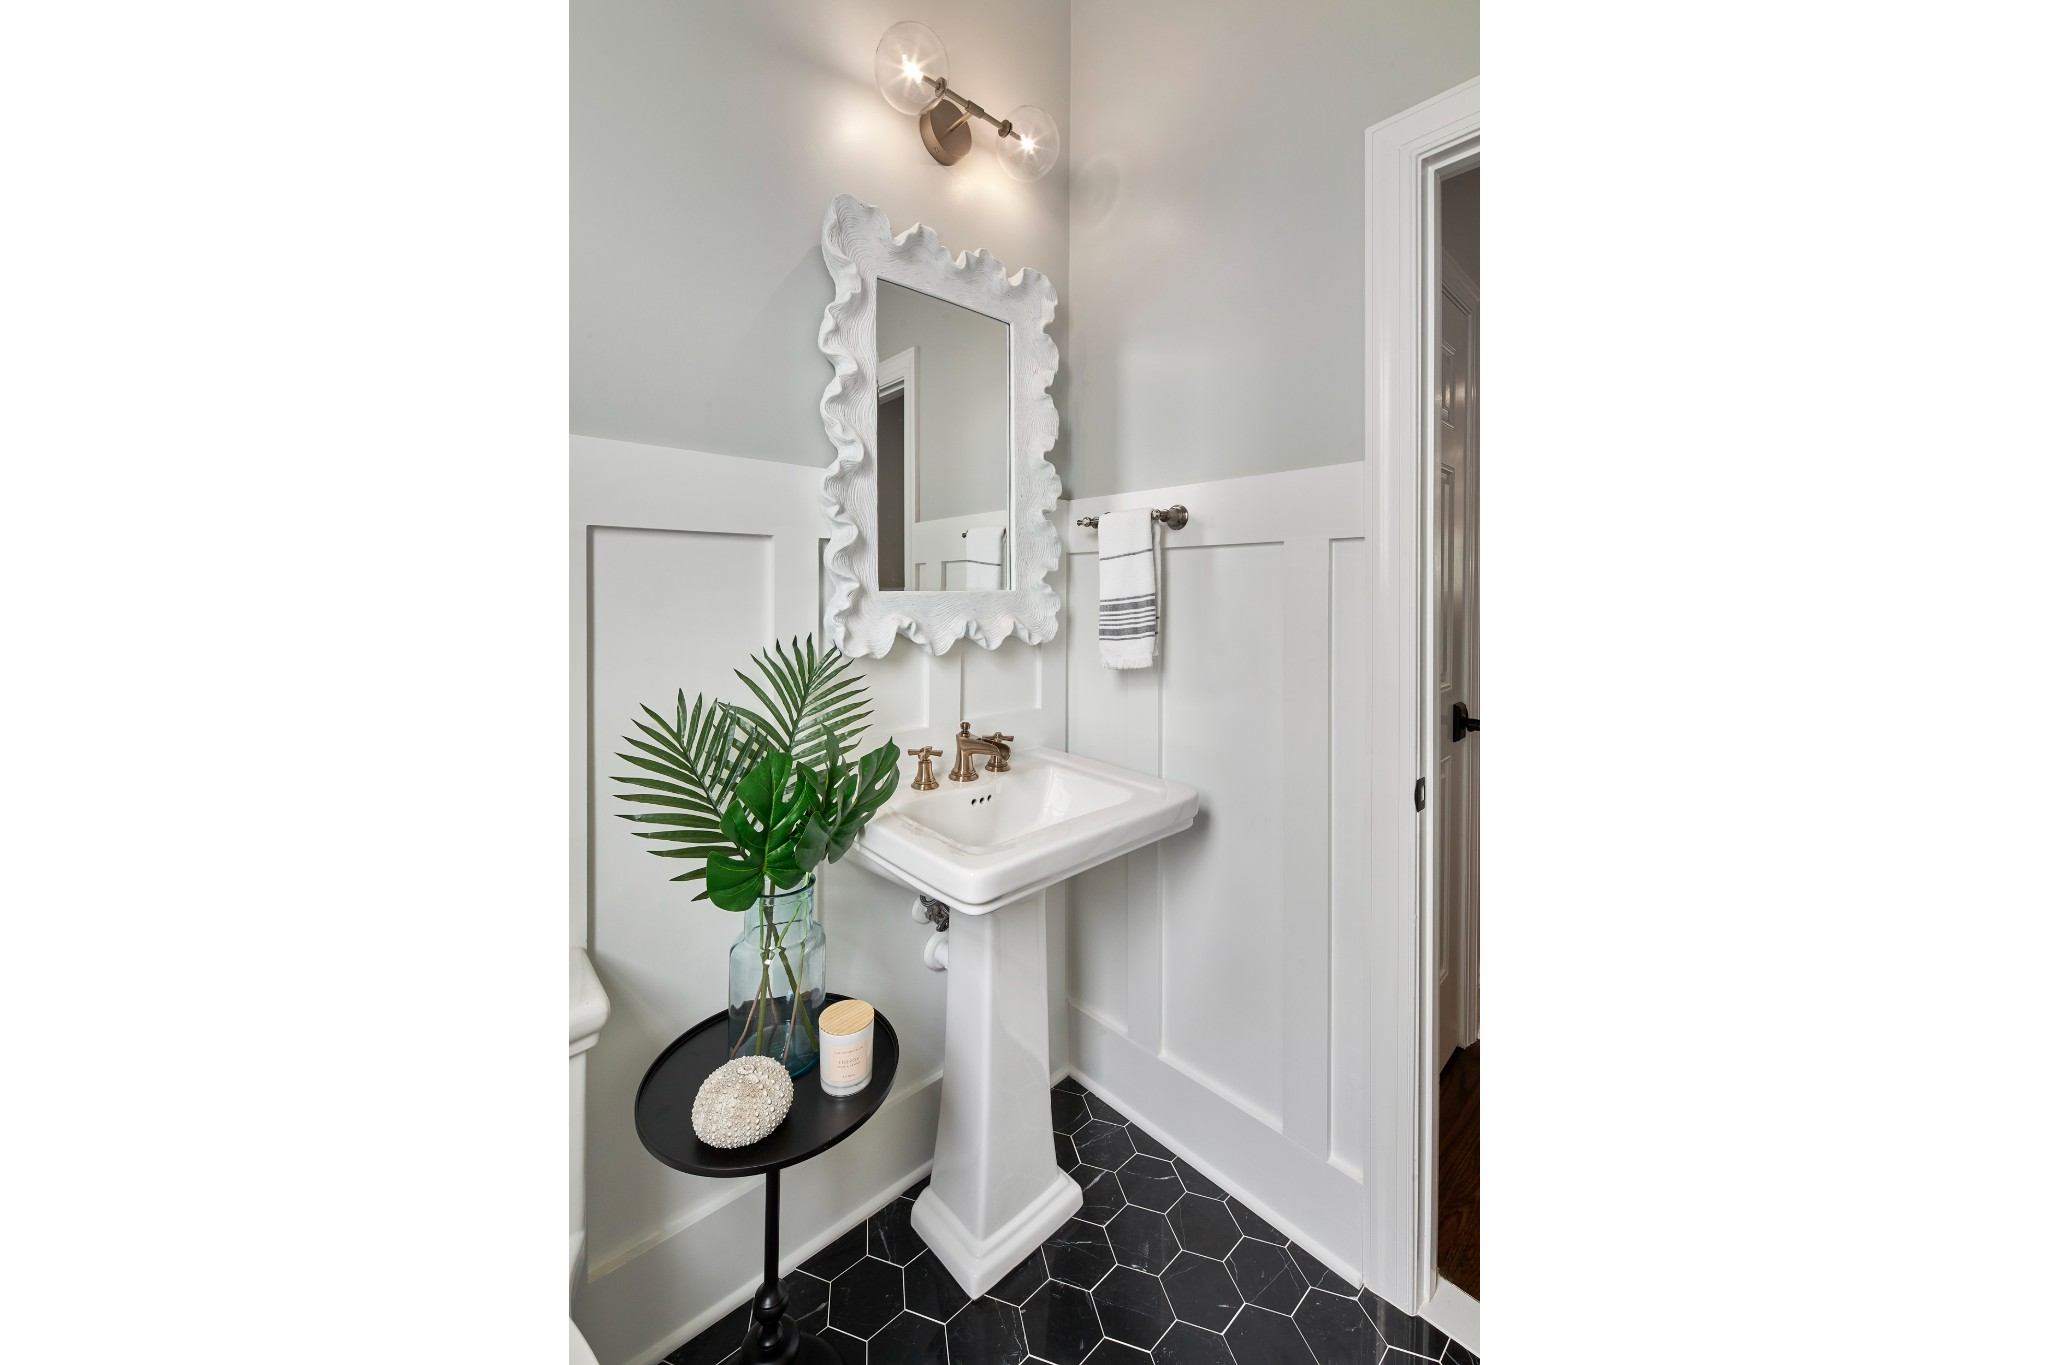 Powder room with white wainscoting and pedestal sink, intricate hanging mirror, black hexagonal tiled floor, and palm frond vase